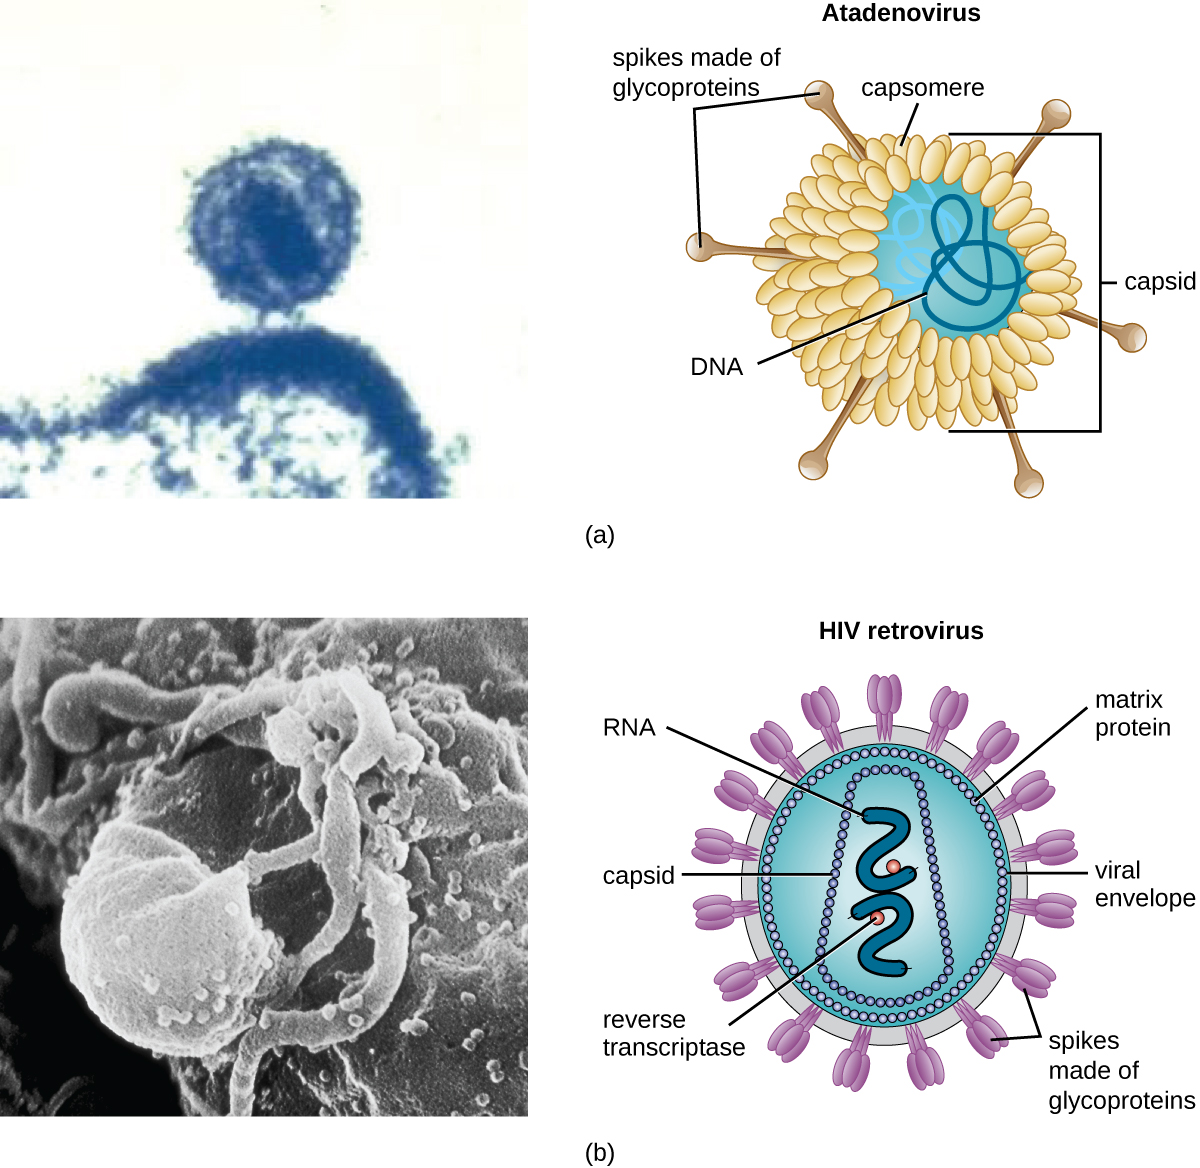 Part A shows a micrograph of atadenovirus, which looks like a wispy sphere that has a larger, flatter structure attached to the bottom. To the right of that is an illustration of the atadenovirus that labels capsomeres, capsids, DNA, and spikes made of glycoproteins. Part B shows the enveloped human immunodeficiency virus in black and white. To the right is an illustration that labels the matrix protein, viral envelope, spikes made of glycoproteins, reverse transcriptase, capsids, and RNA.